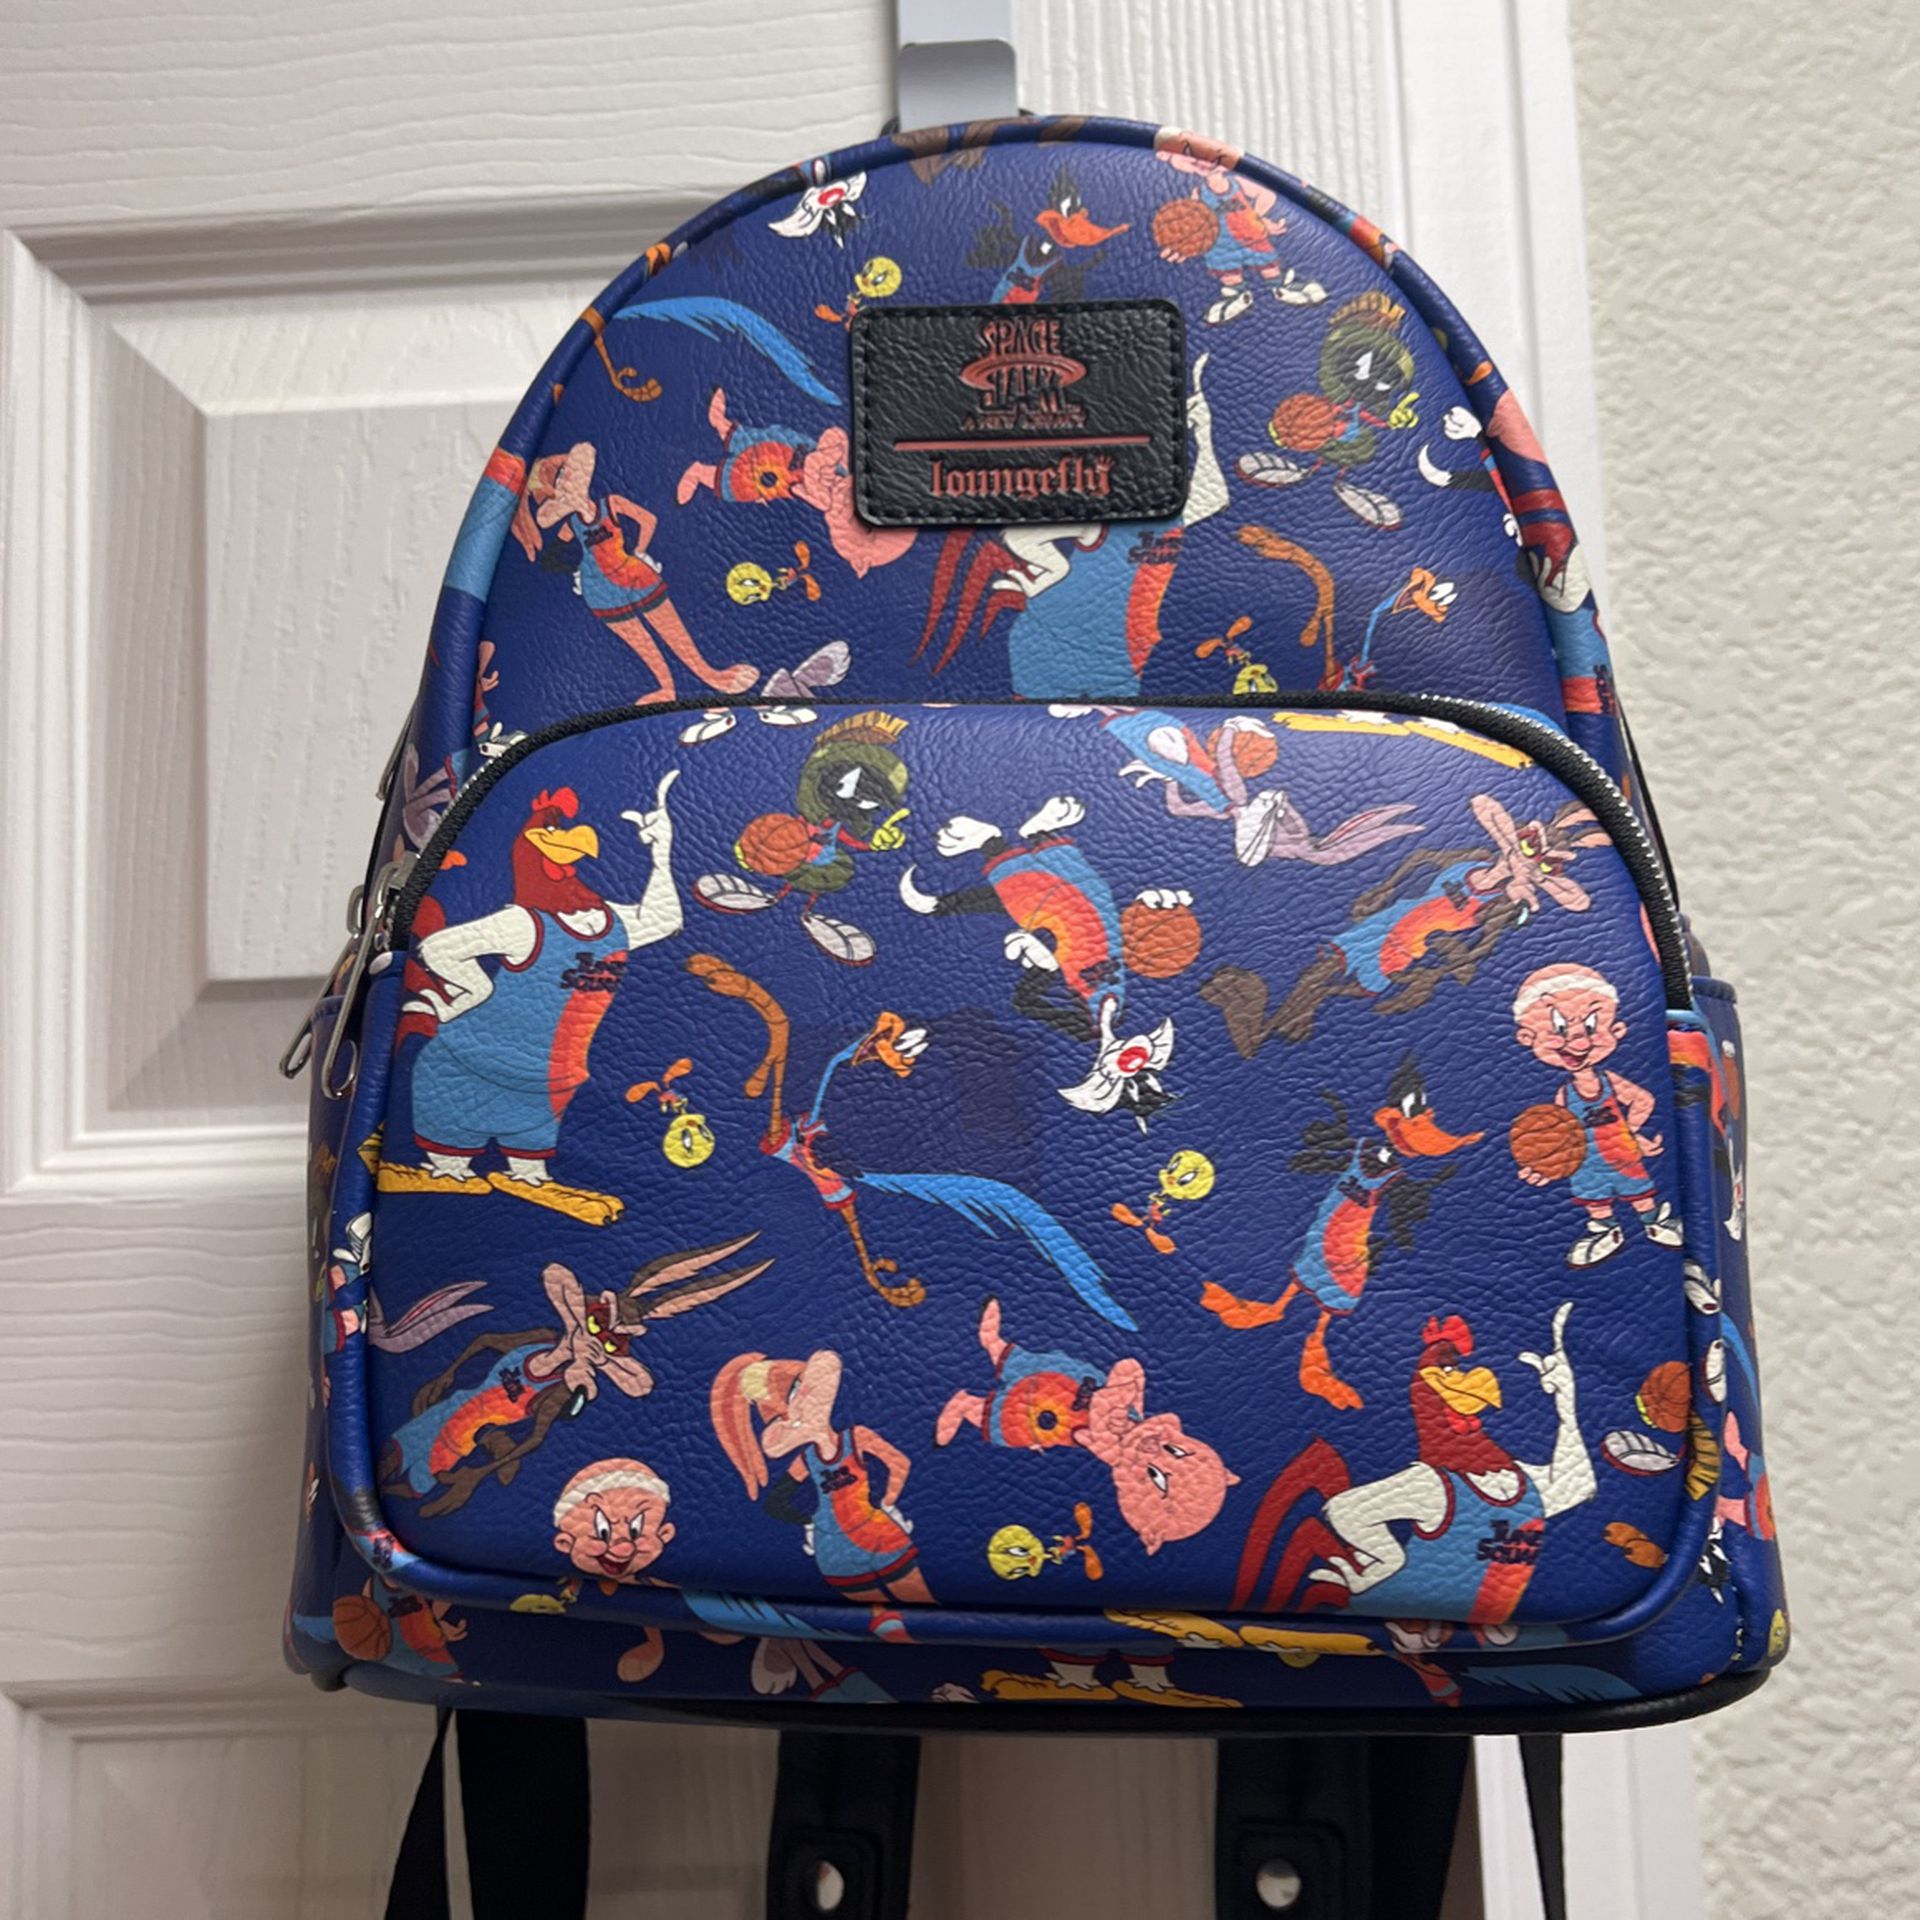 Loungefly Space Jam Mini backpack 